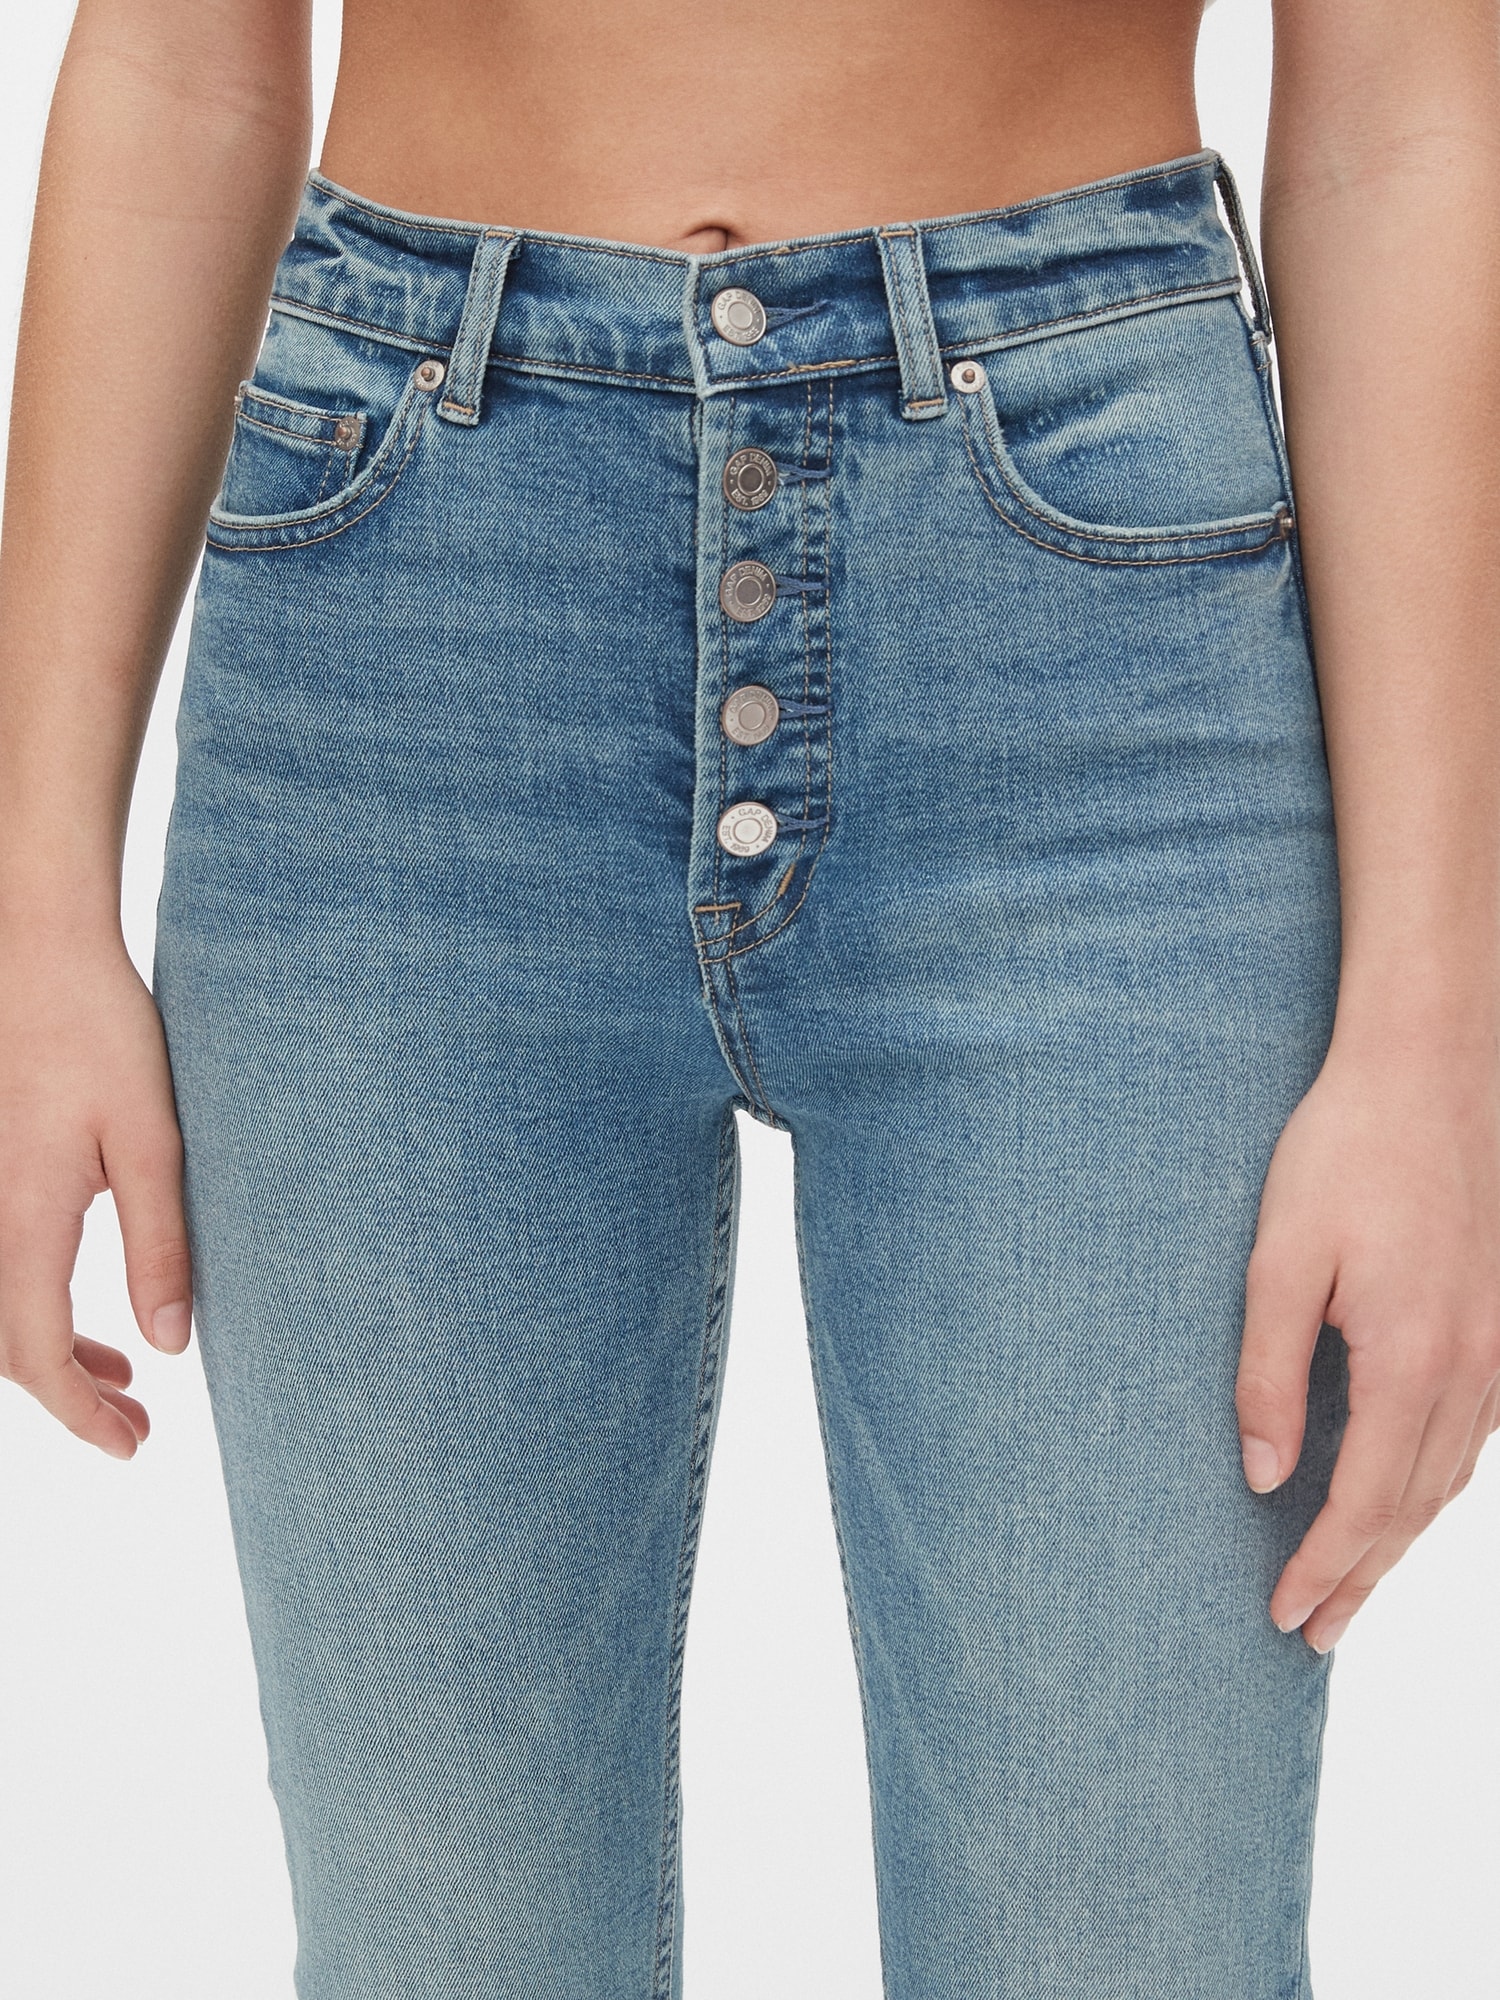 women's exposed button fly jeans